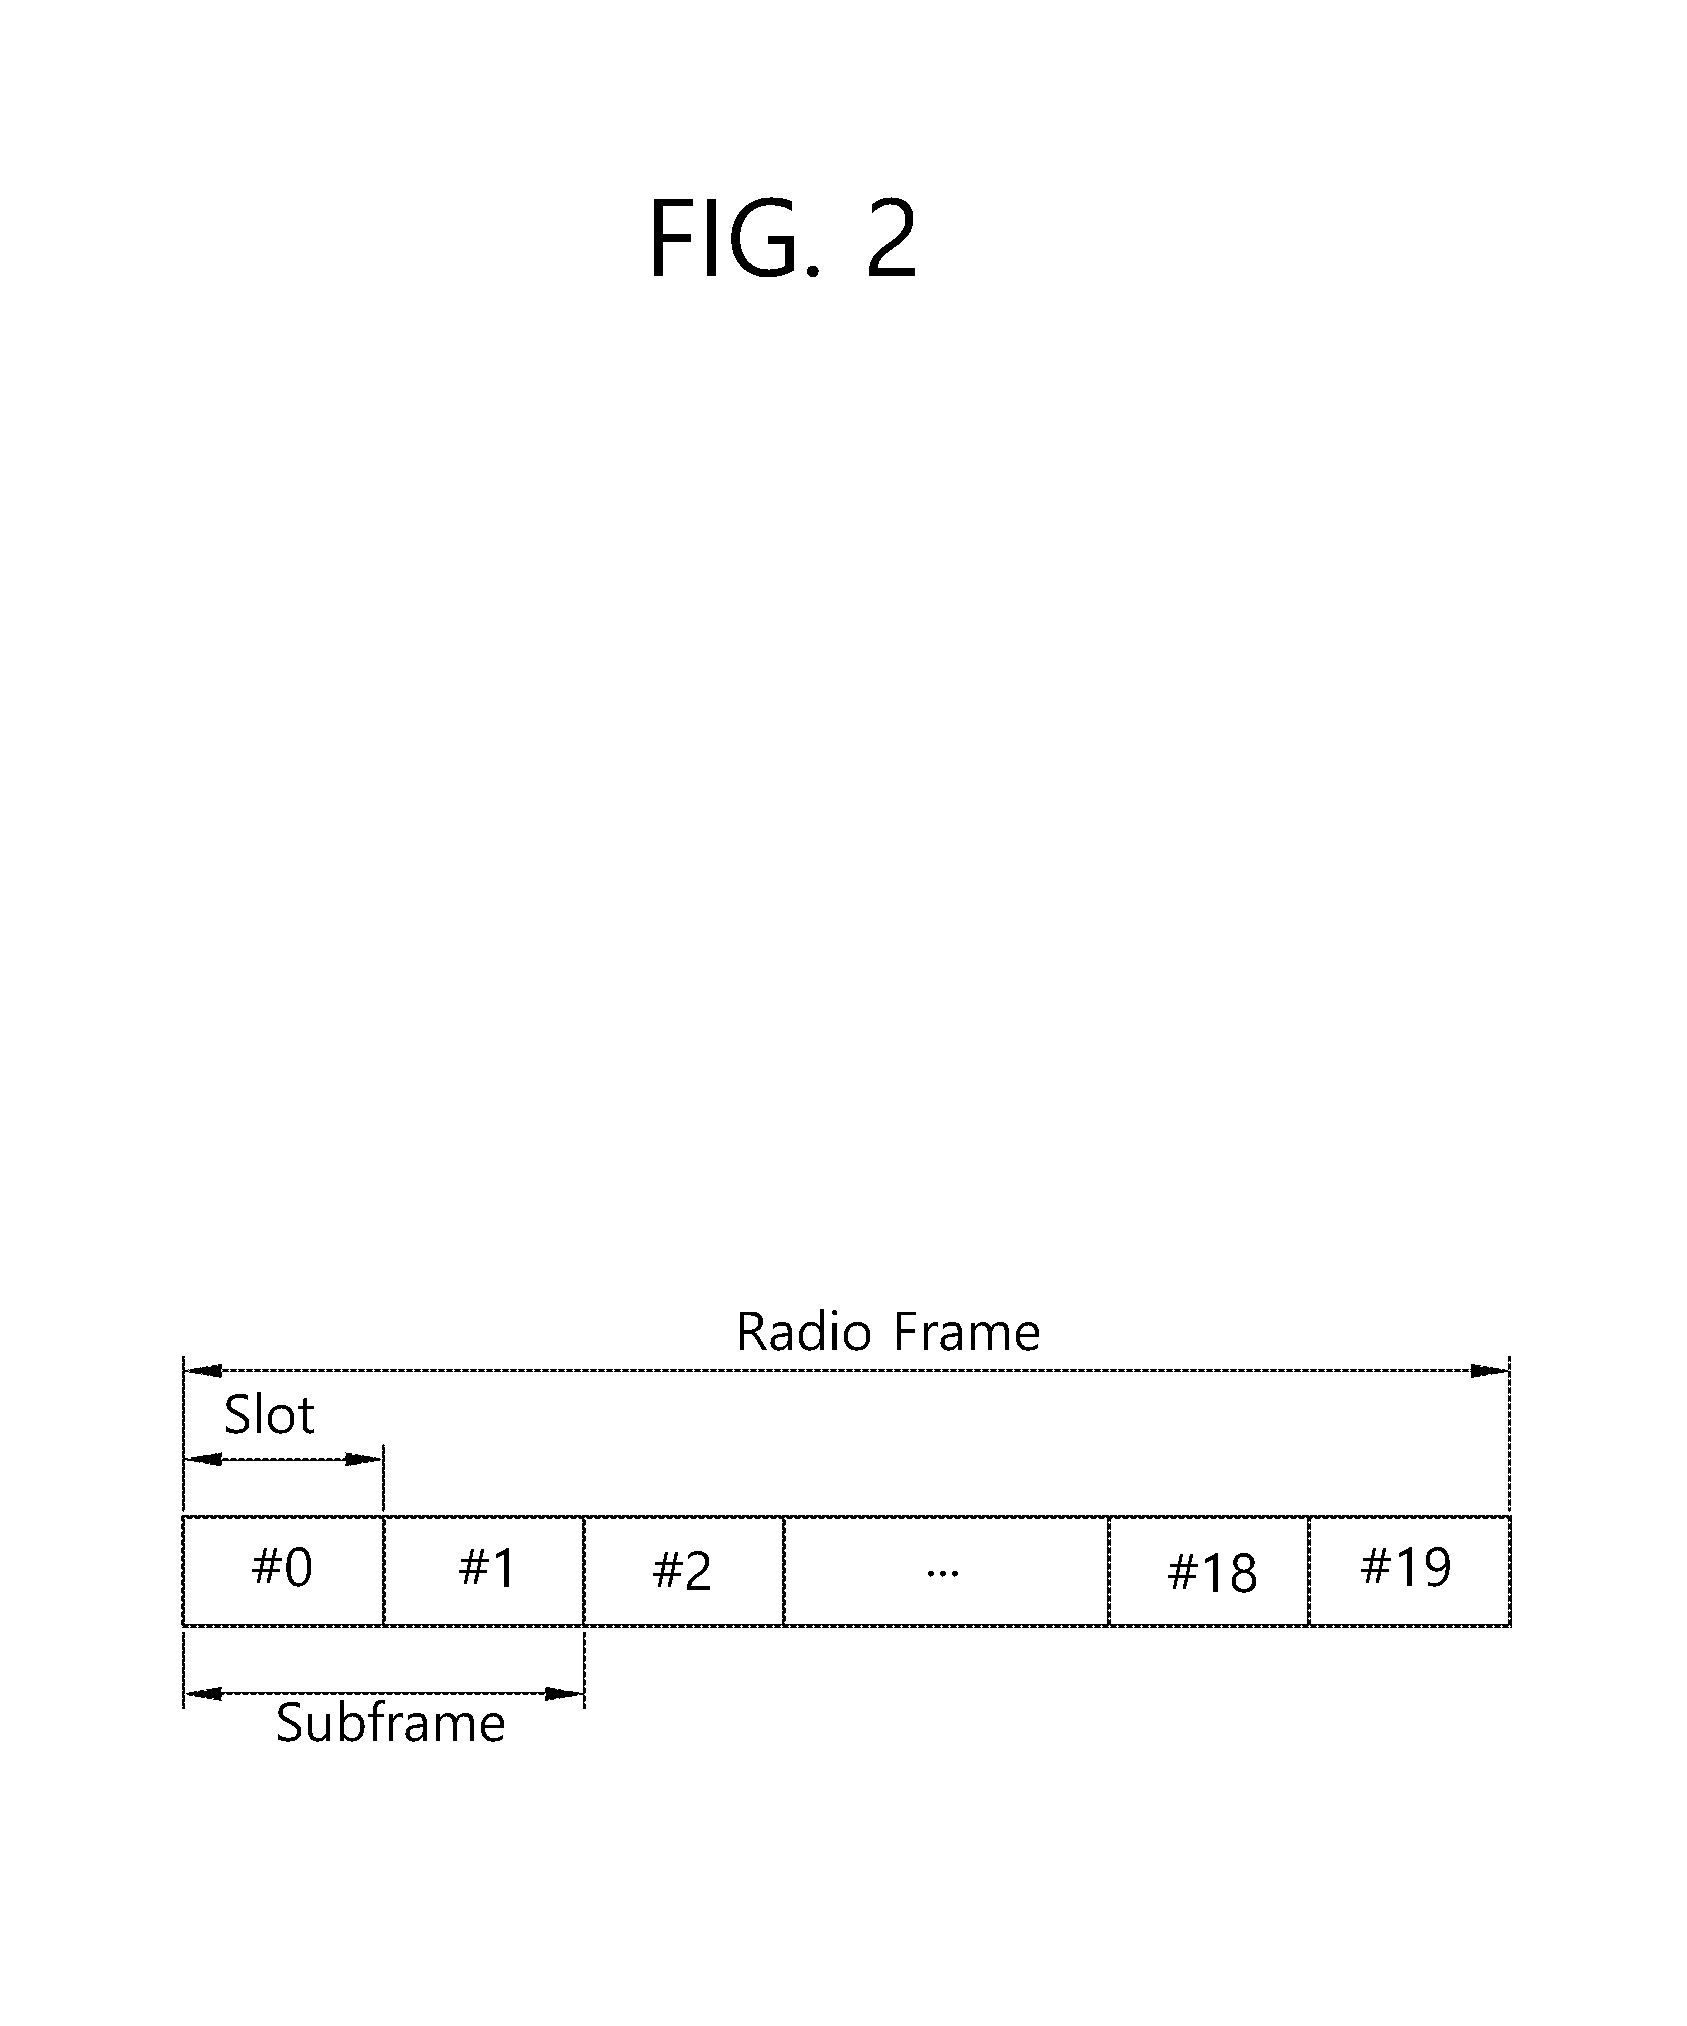 User apparatus including a dedicated RF chain for prose and transmitting and receiving method